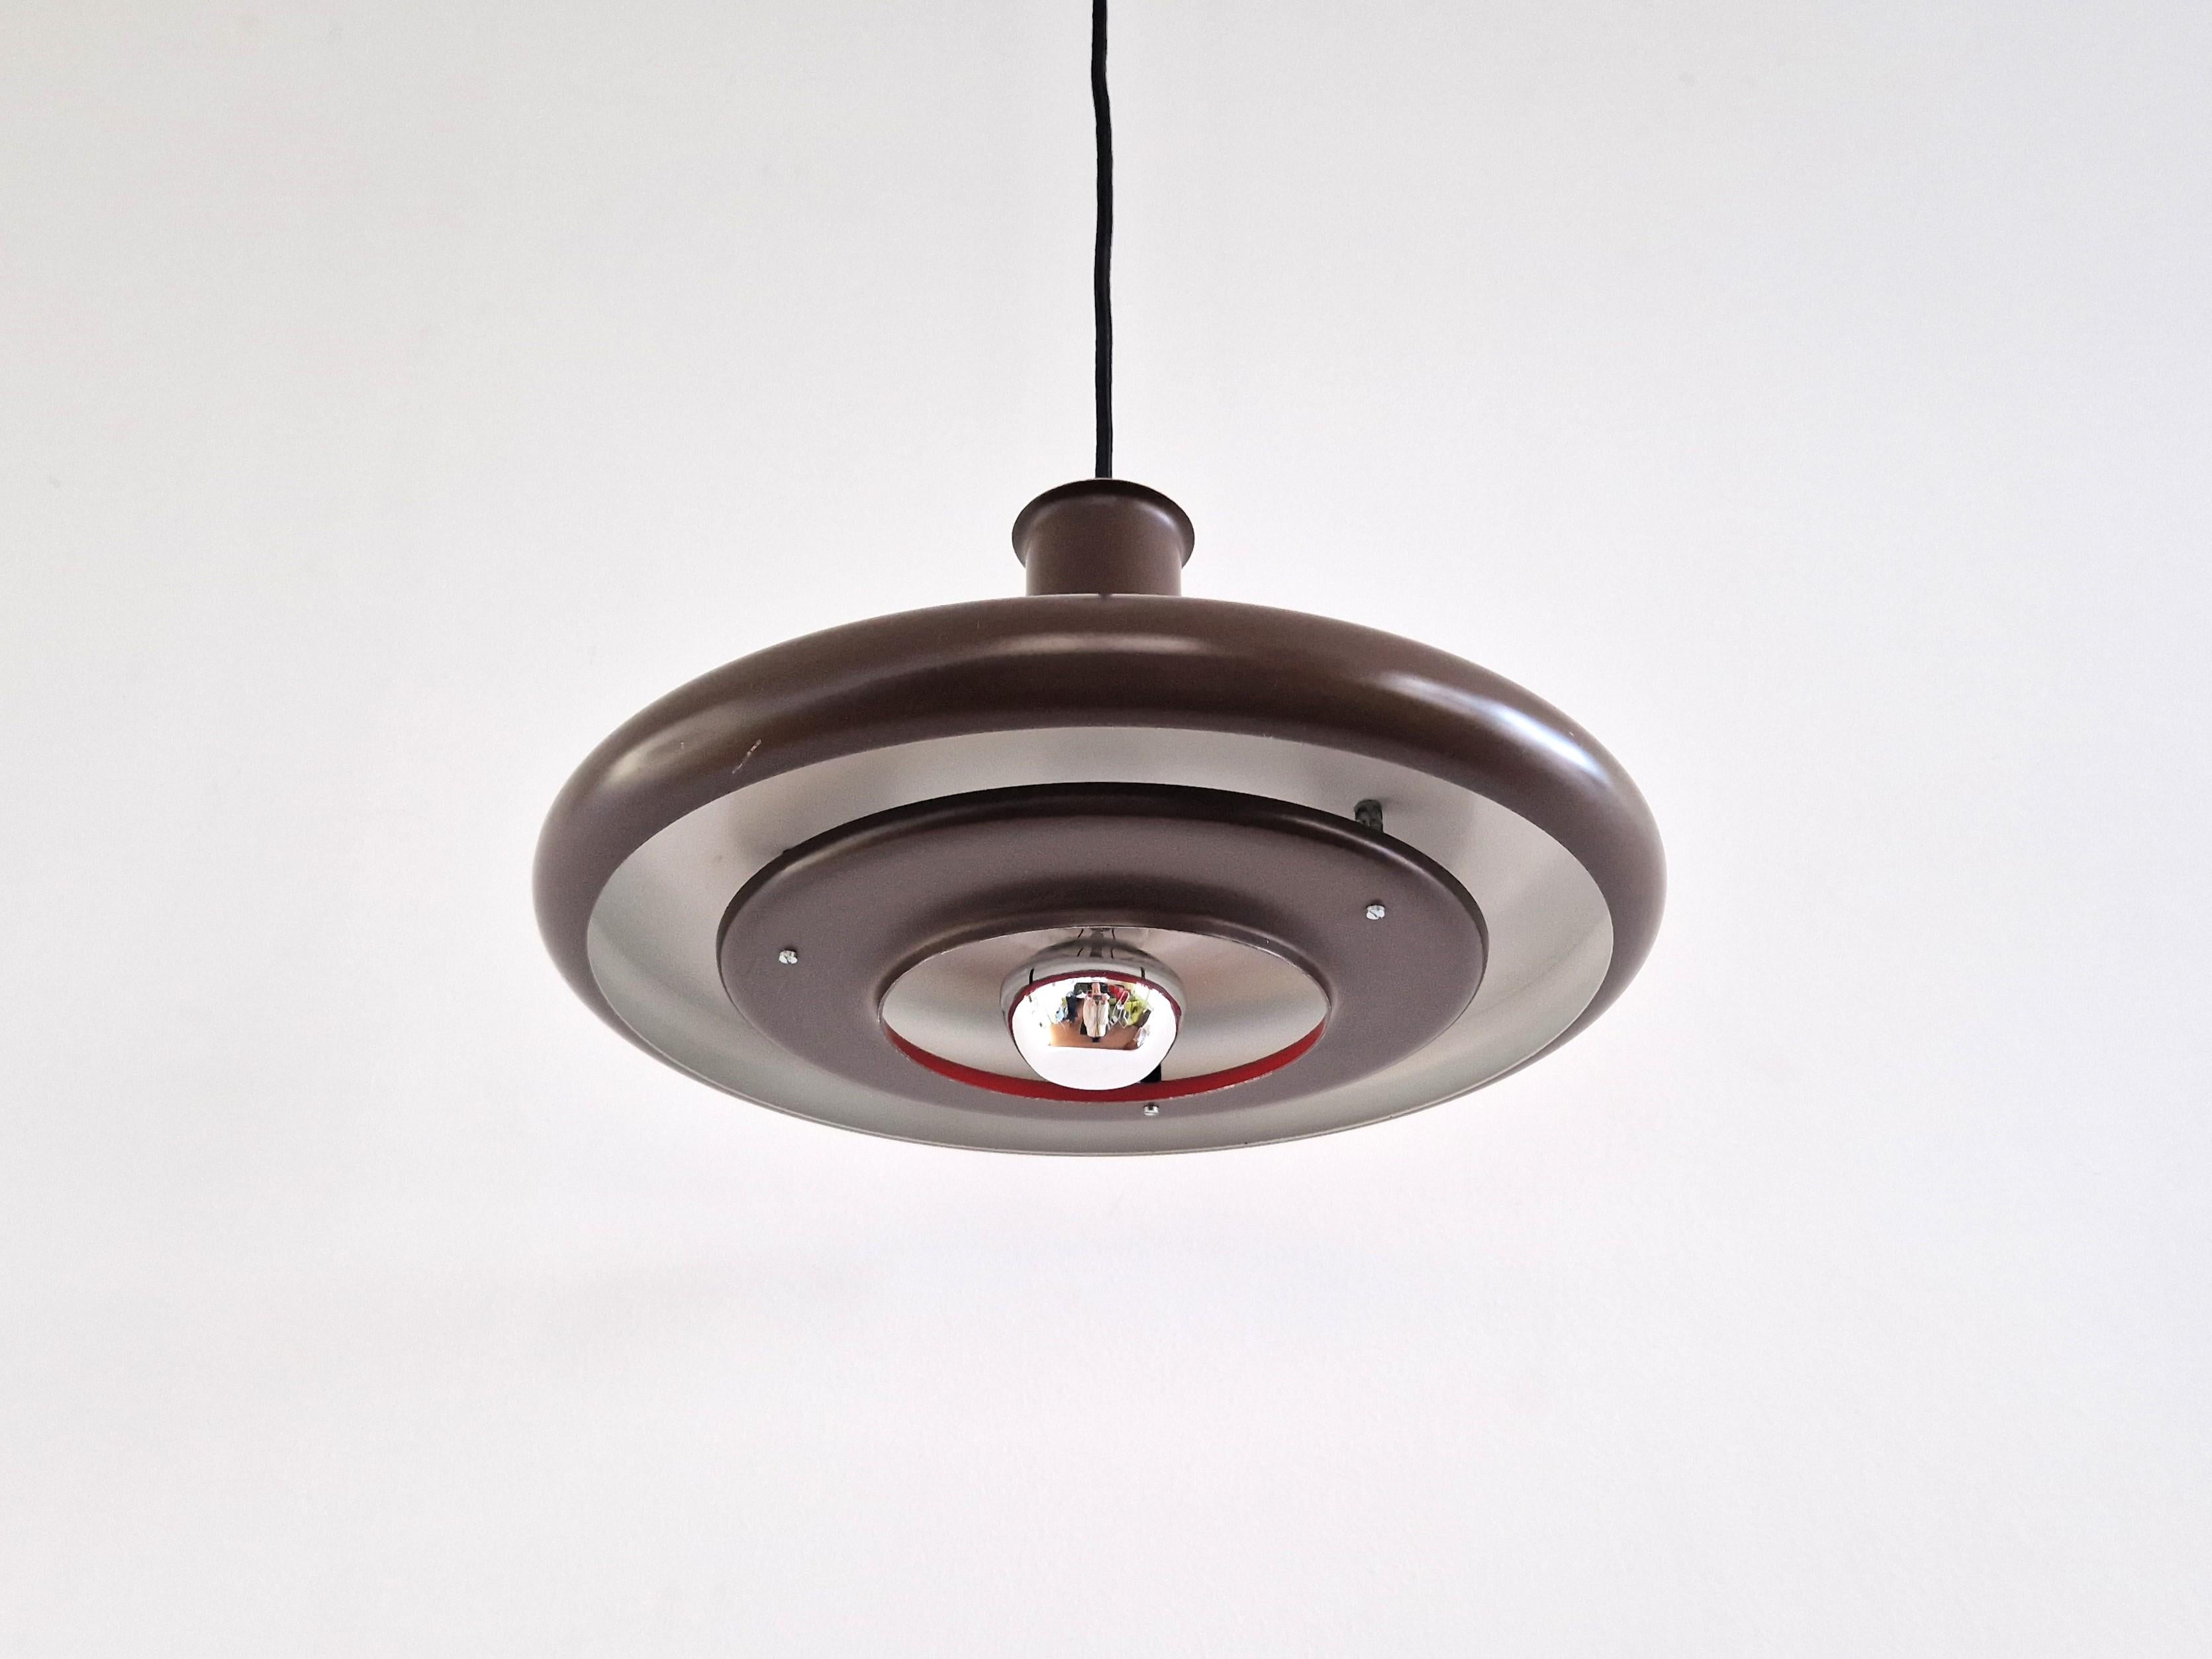 The 'Optima' pendant lamp was designed in 1972 by Hans Due for Fog & Mørup in Denmark. This particular size of ø35 cm appeared towards the end of the 1970's. The lamp is made of brown painted metal. It has a large circular outer shade with a